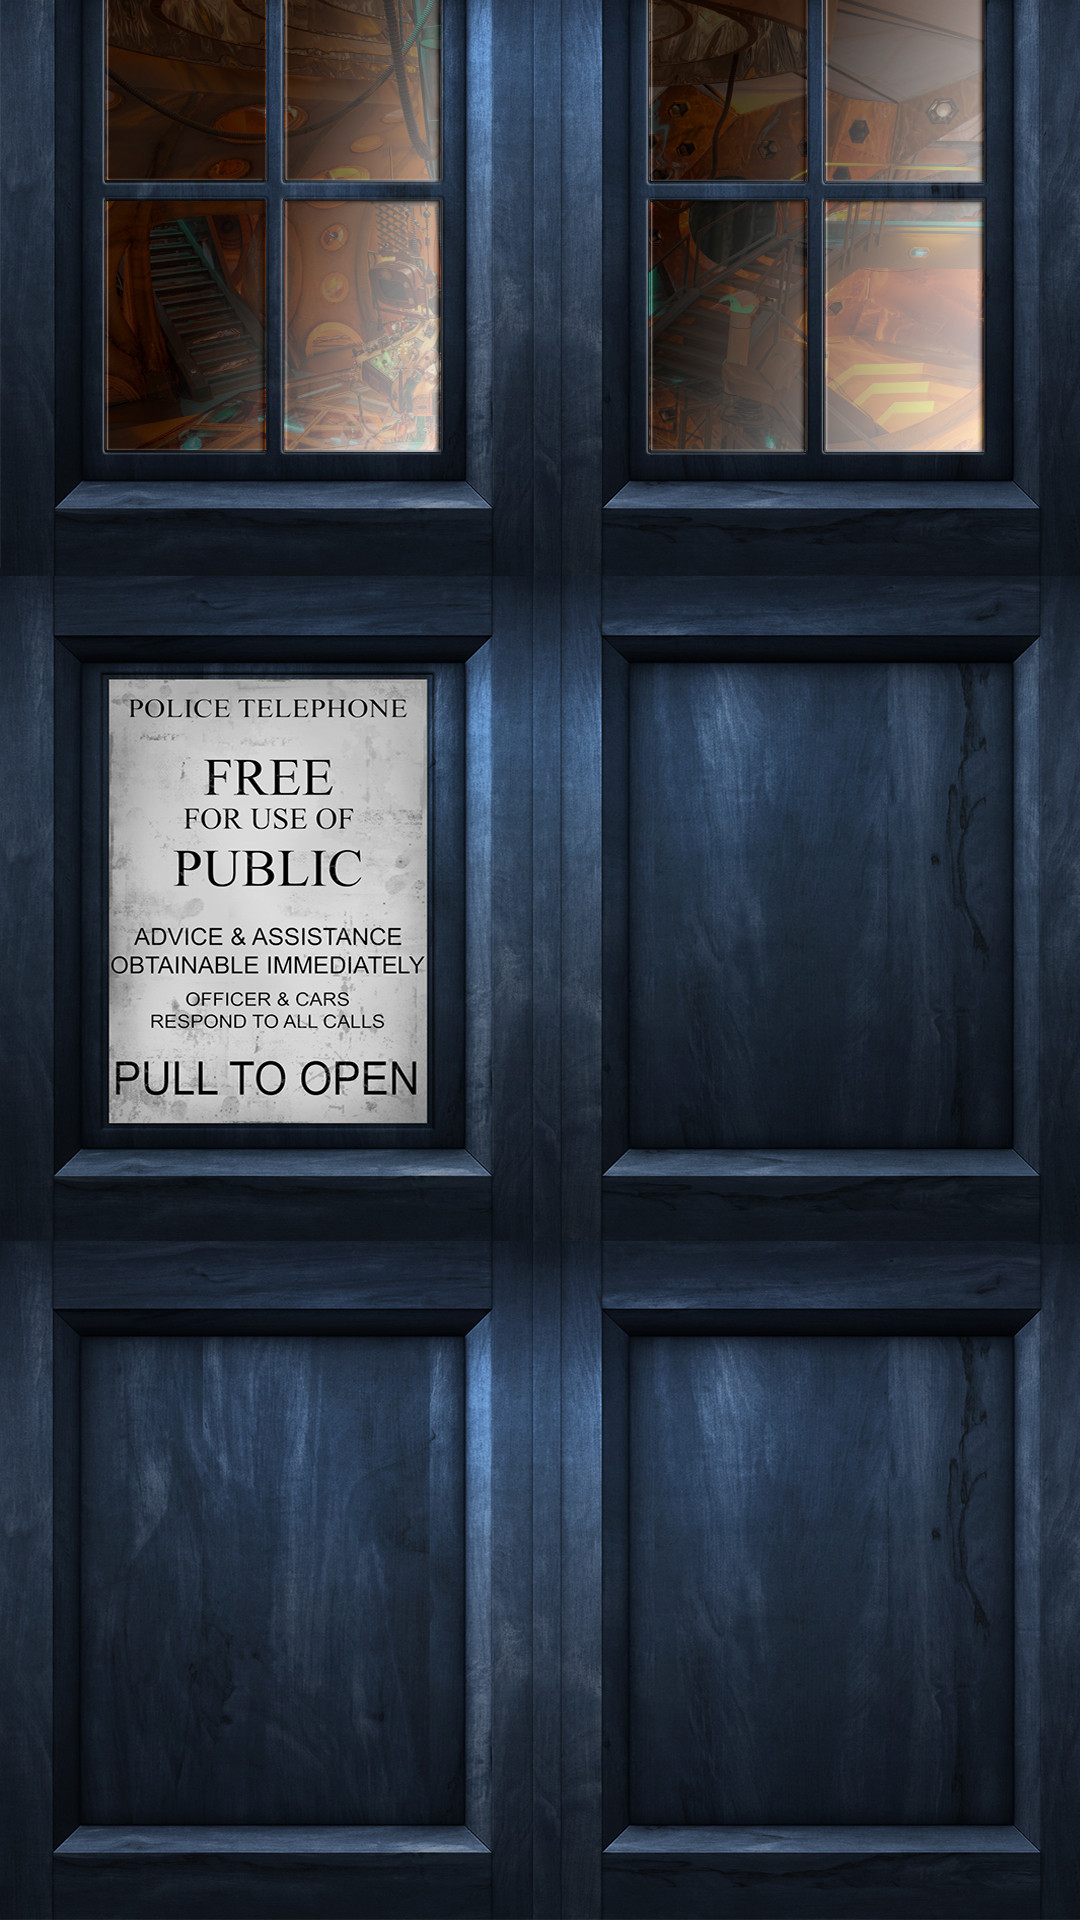 Made a Tardis HQ wallpaper for my phone